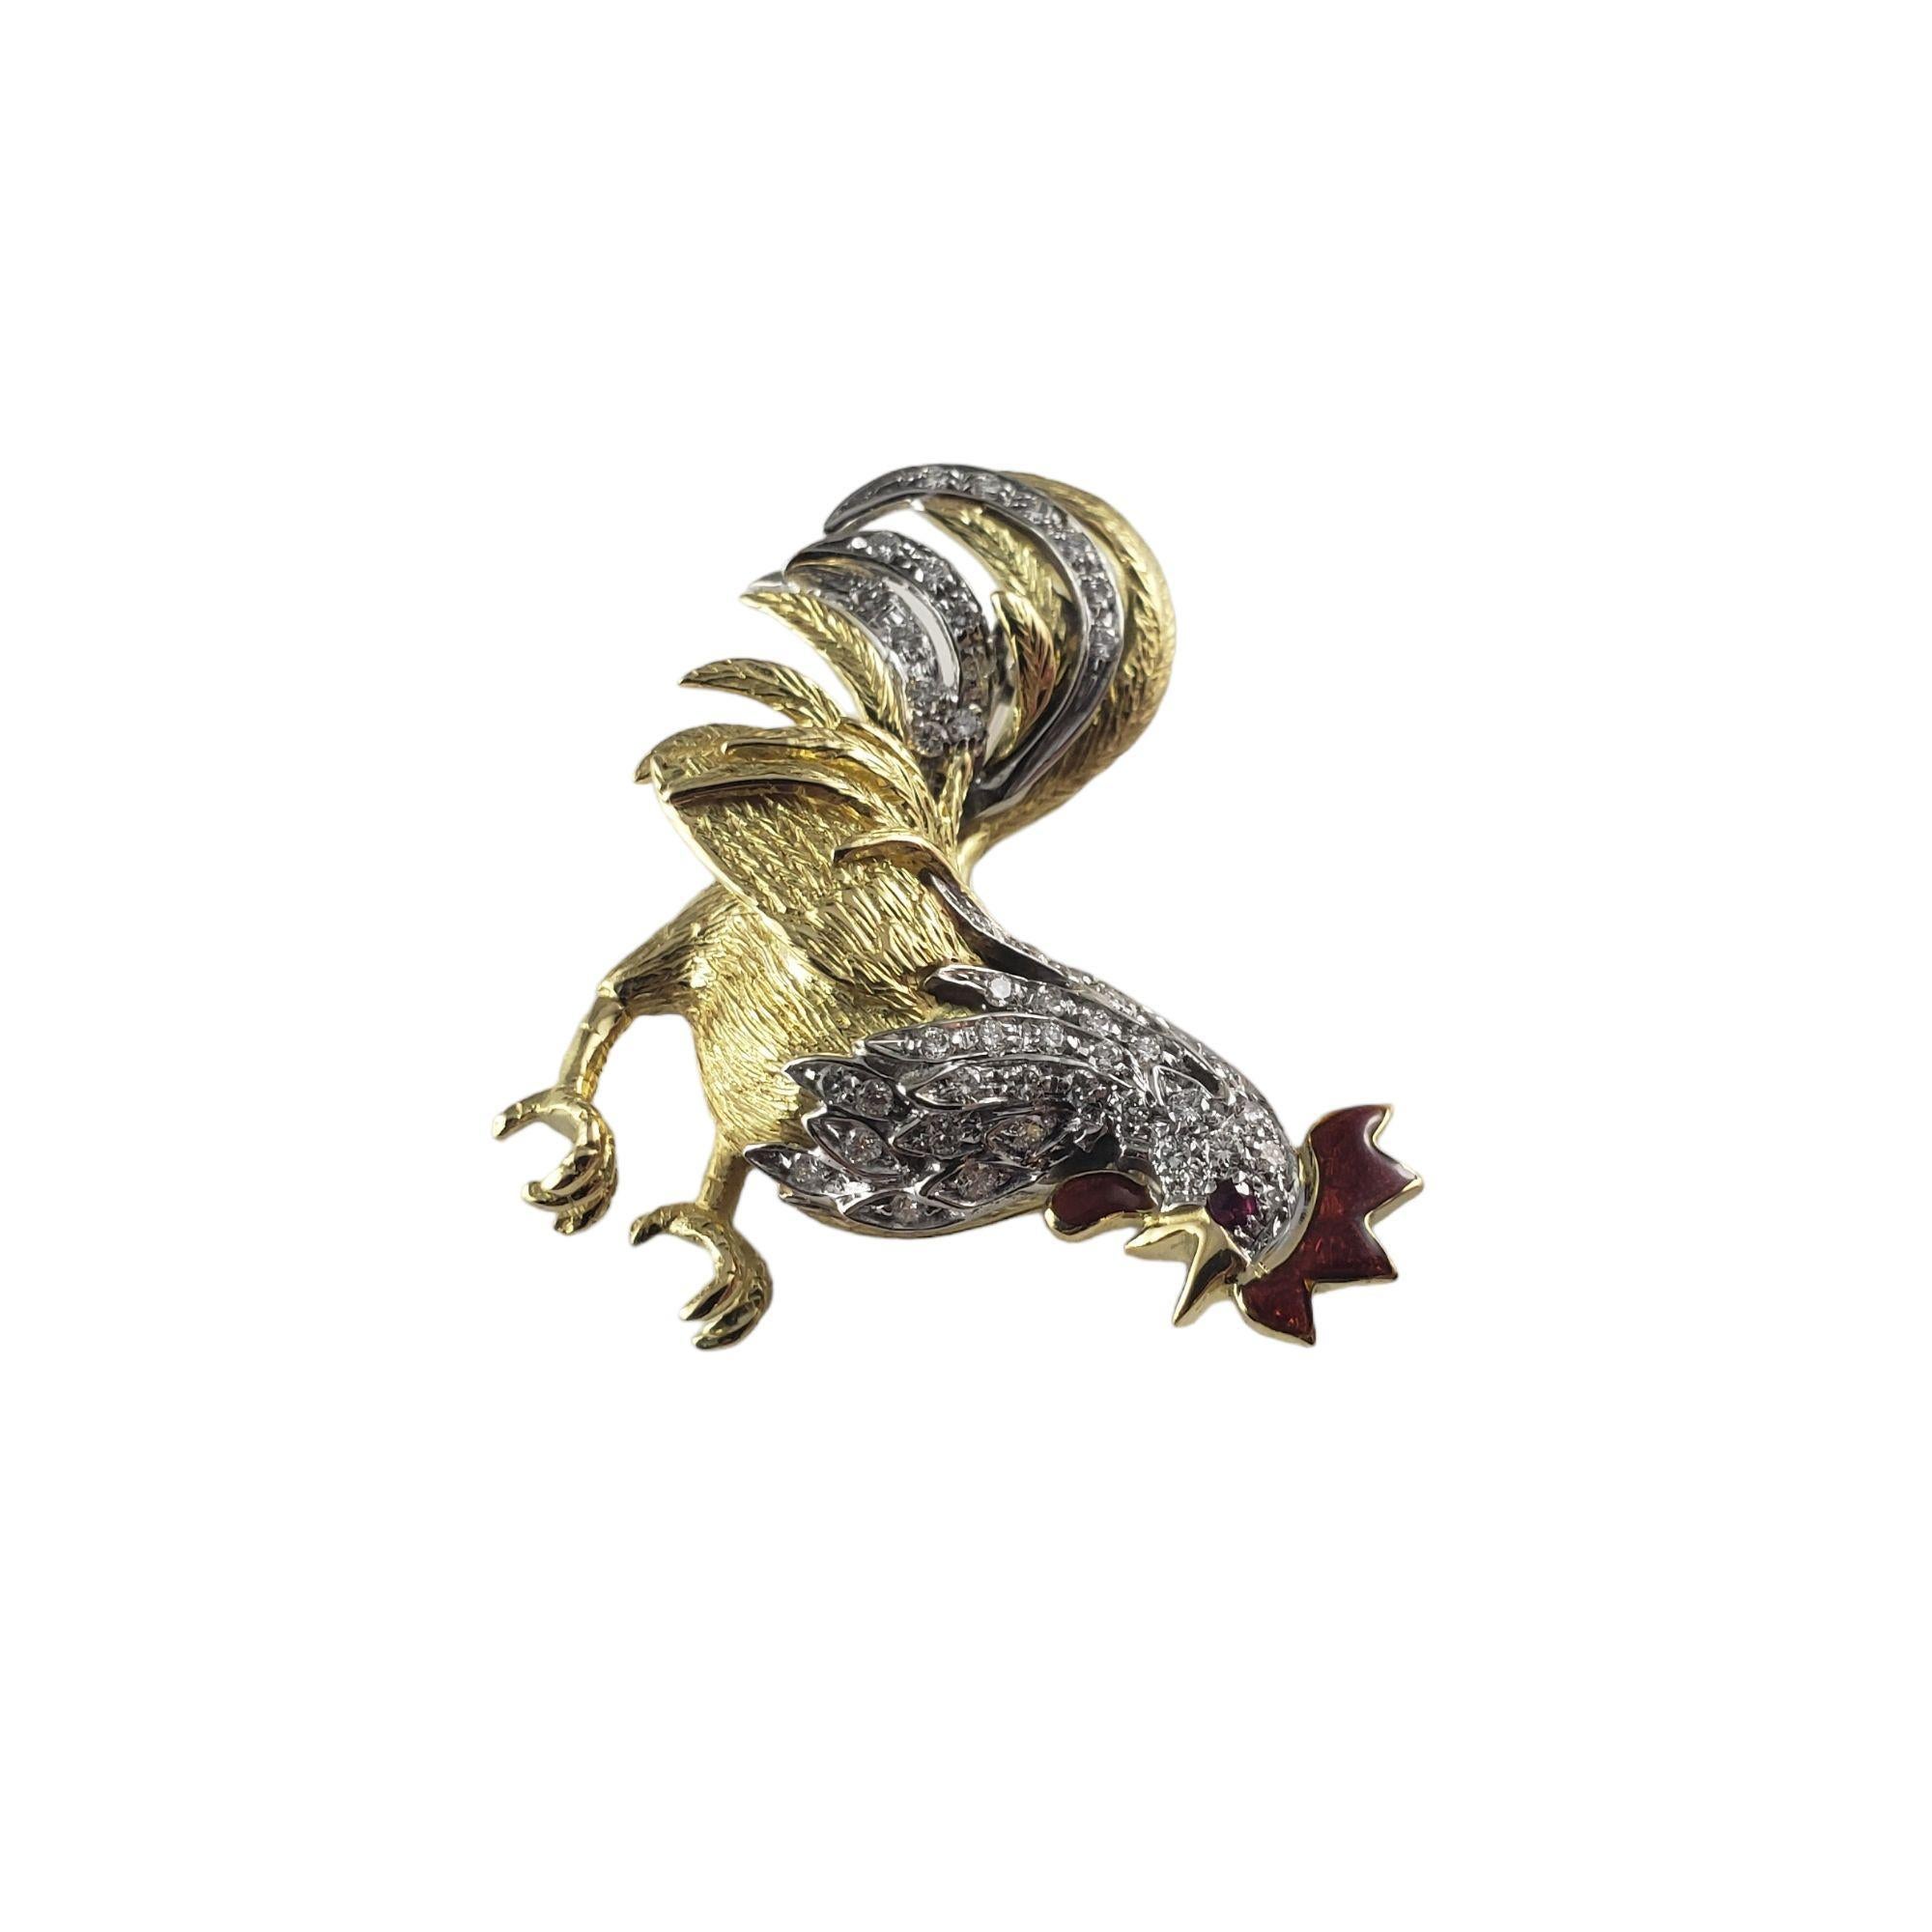 Garavelli 18 Karat Yellow Gold and Diamond Rooster Brooch-

This stunning brooch by Garavelli features a beautifully detailed rooster accented with 48 round brilliant cut diamonds and one ruby eye.

Approximate total diamond weight: .50 ct.

Diamond